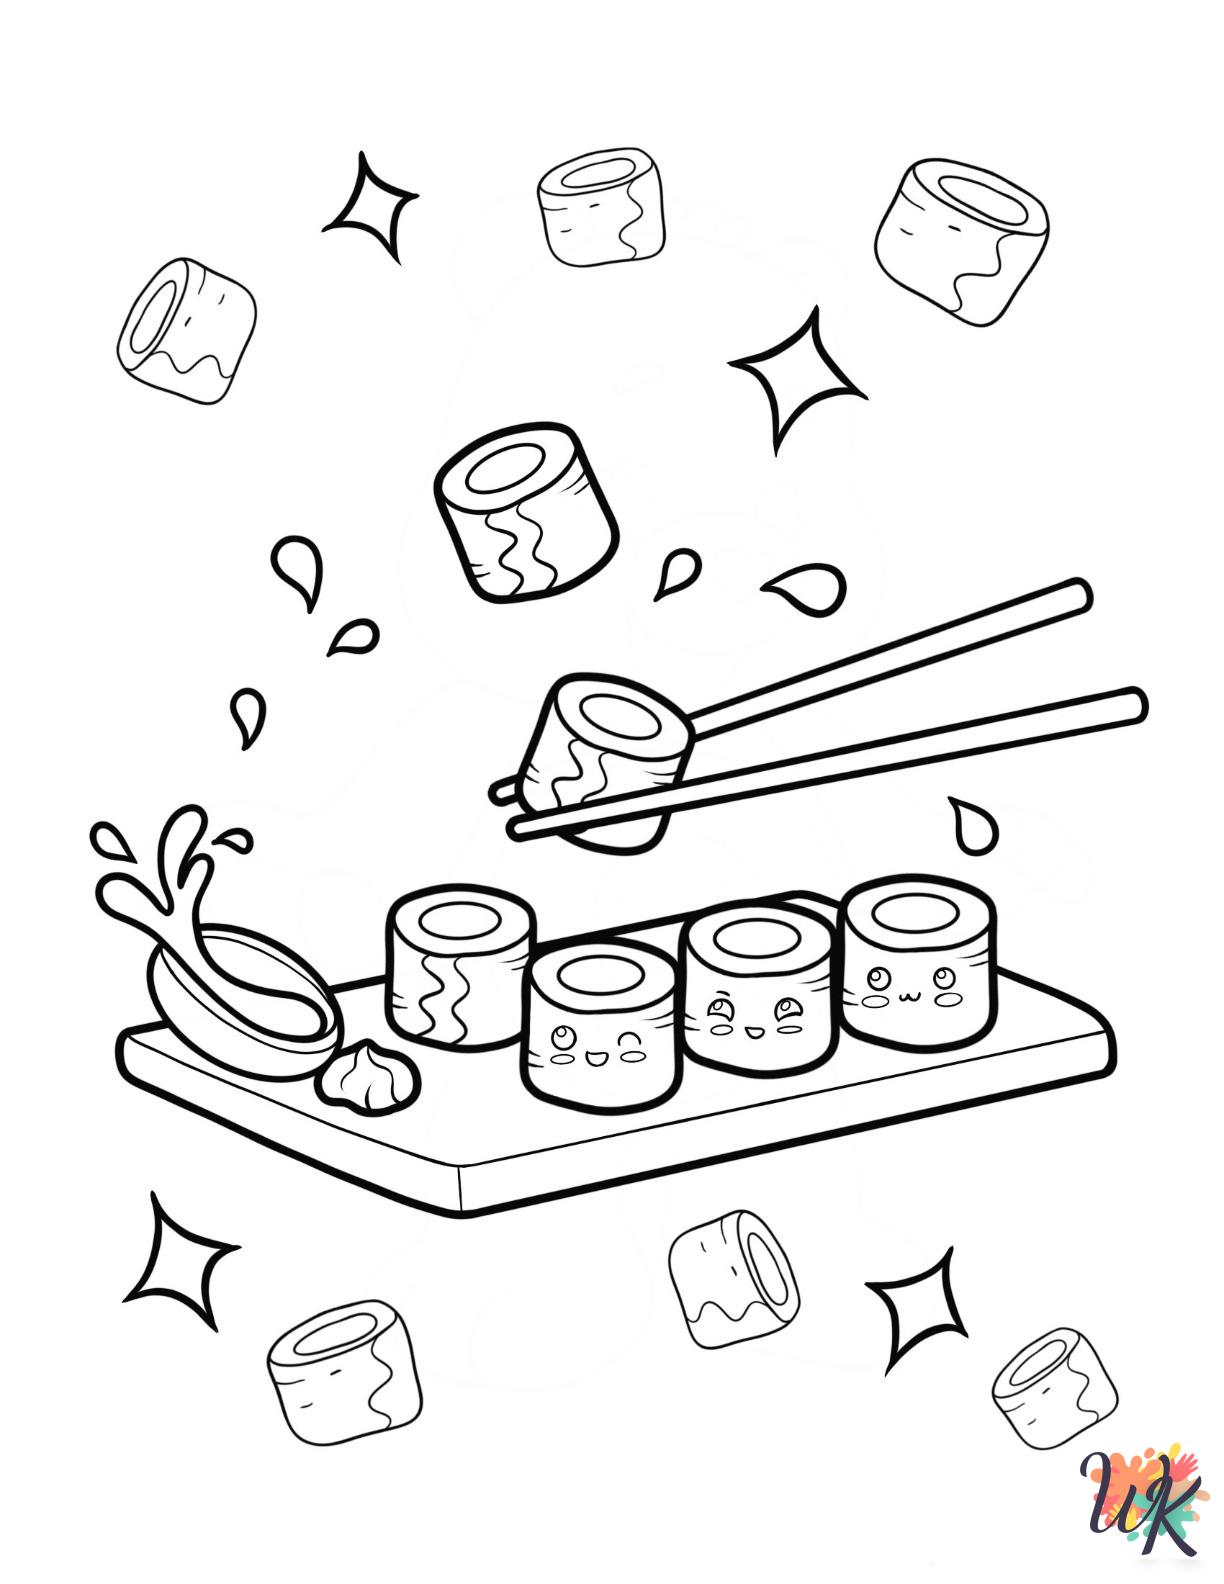 Sushi coloring pages for adults easy